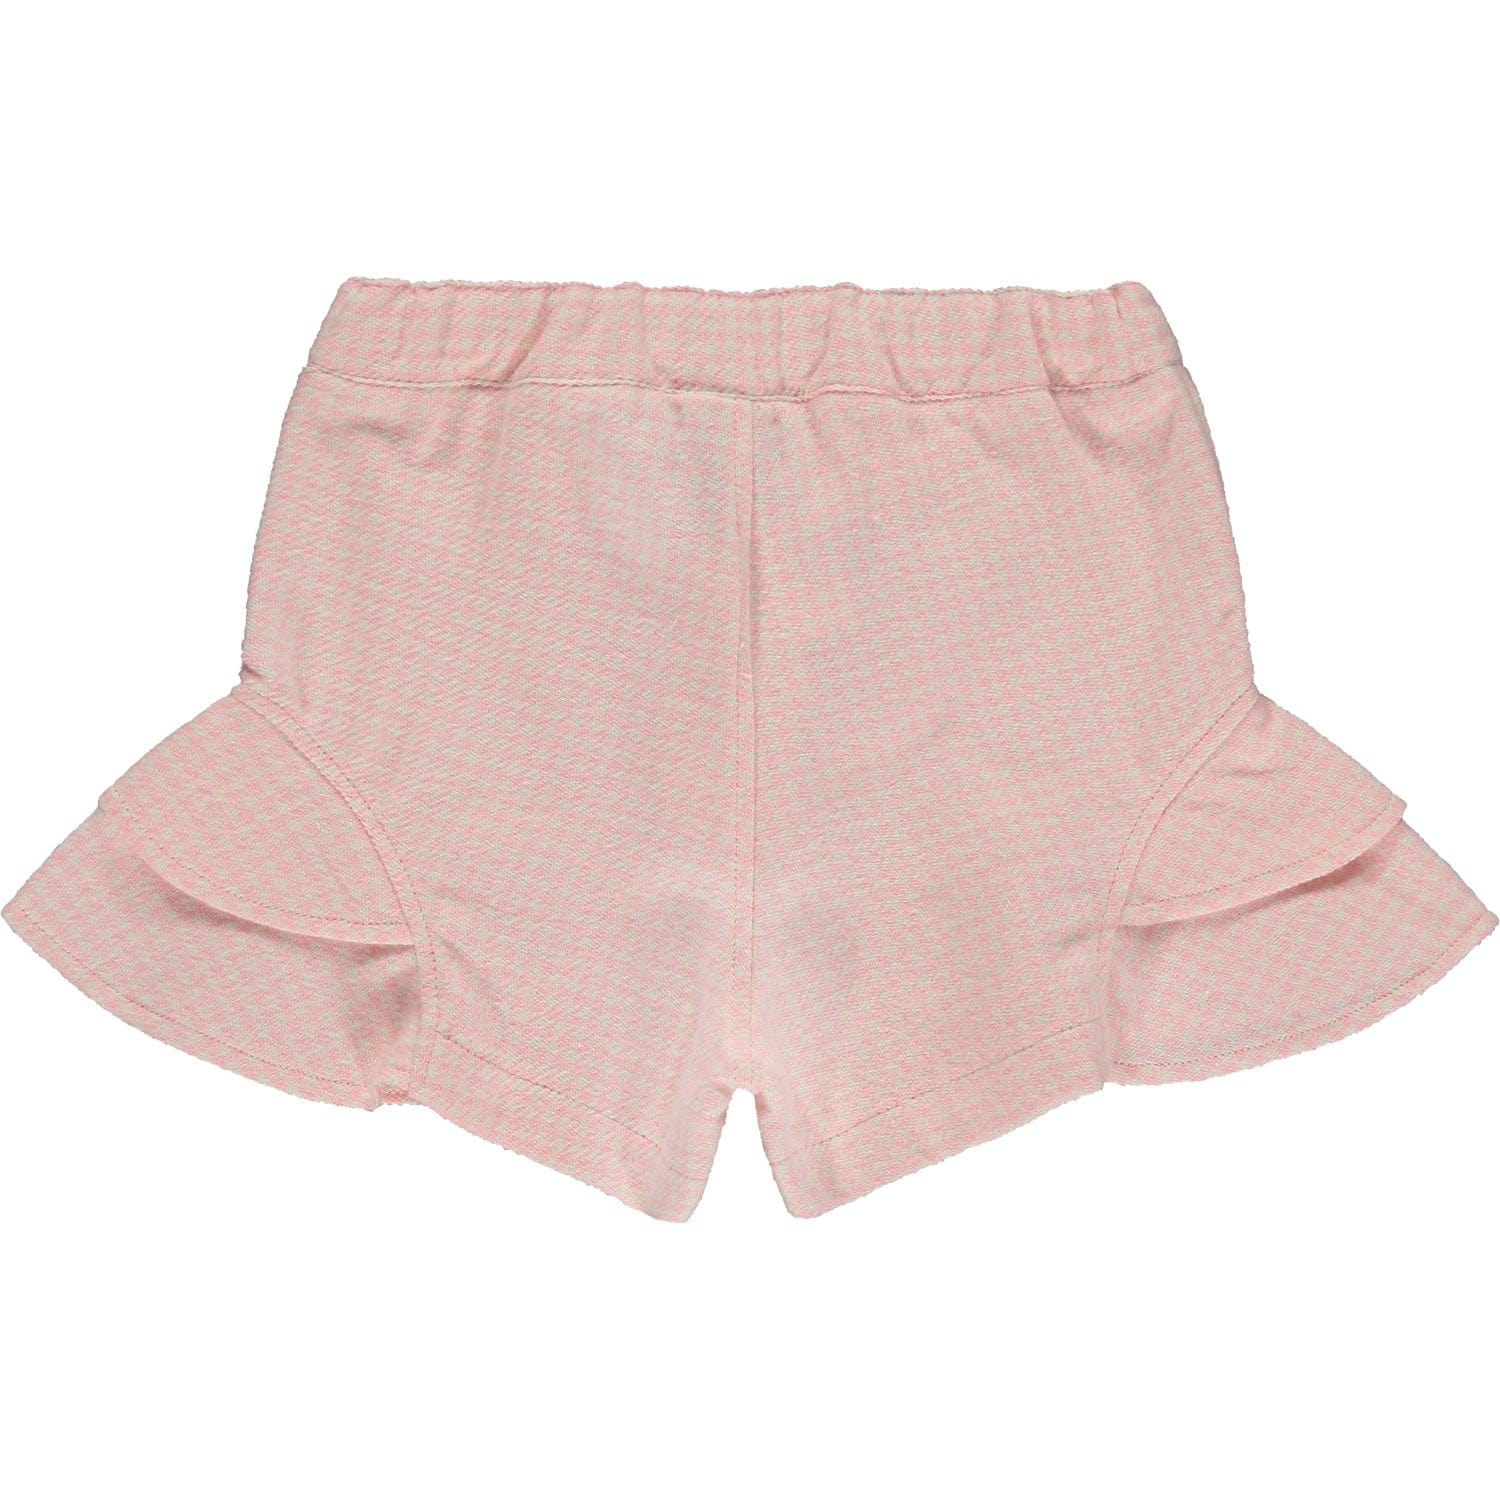 A-Dee Tops & Shorts A-Dee Peony Pink Angel Houndstooth Short Set